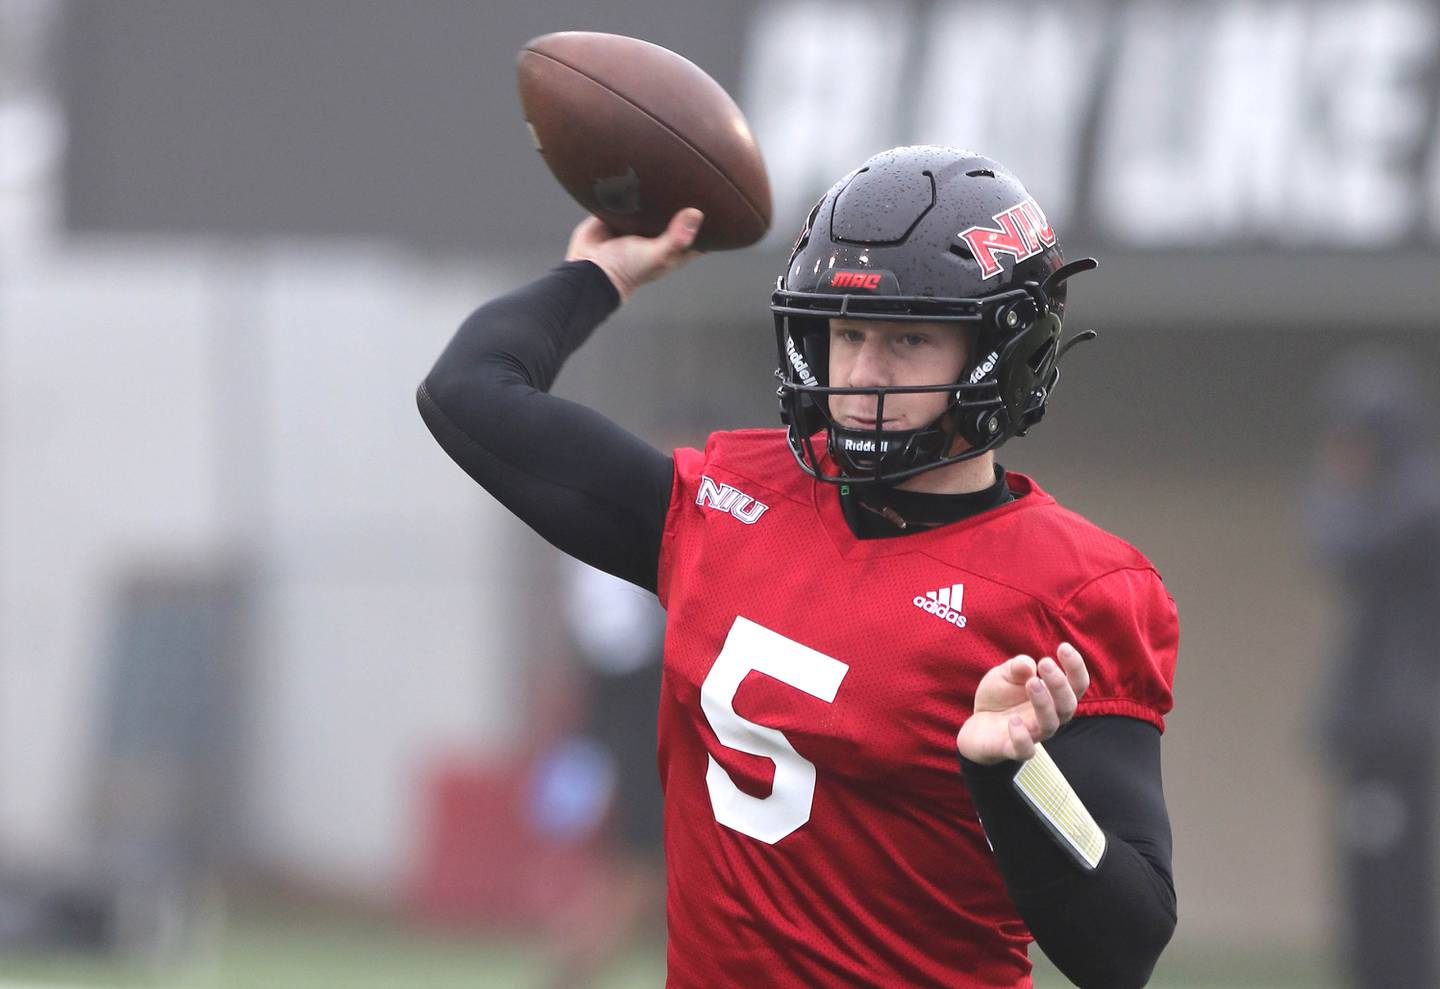 Northern Illinois University quarterback  	Justin Lynch throws a pass during spring practice Wednesday, March 23, 2022, in Huskie Stadium at NIU in DeKalb.